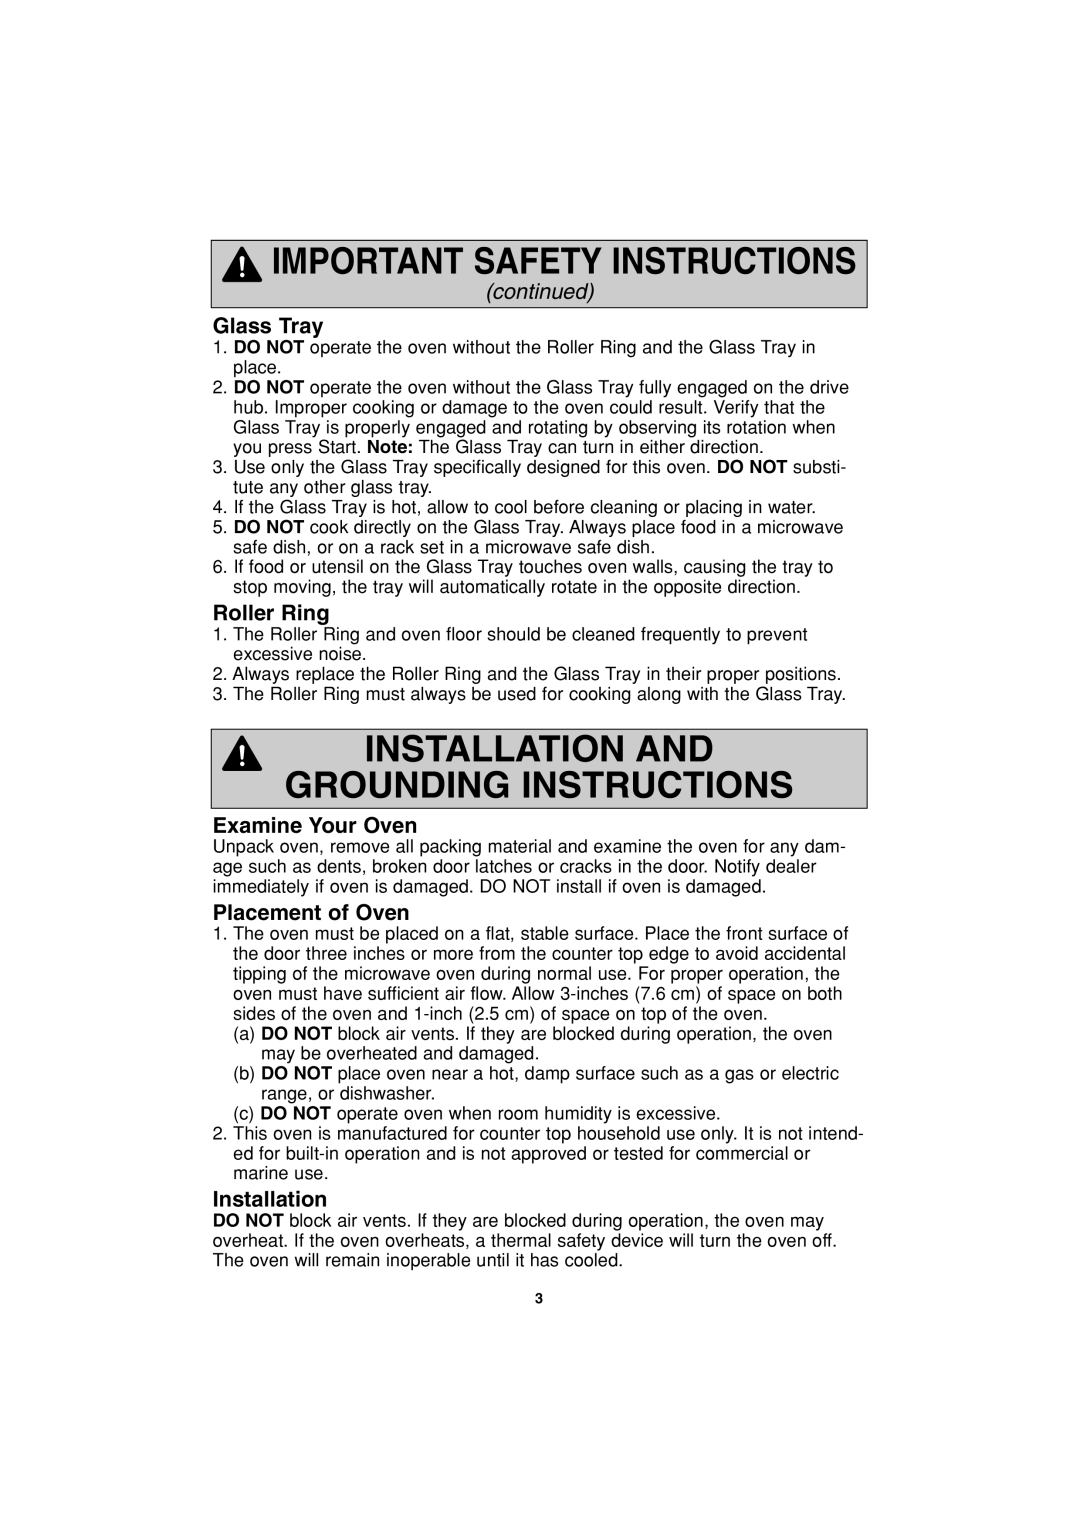 Panasonic NN-S443 Installation And Grounding Instructions, Glass Tray, Roller Ring, Examine Your Oven, Placement of Oven 